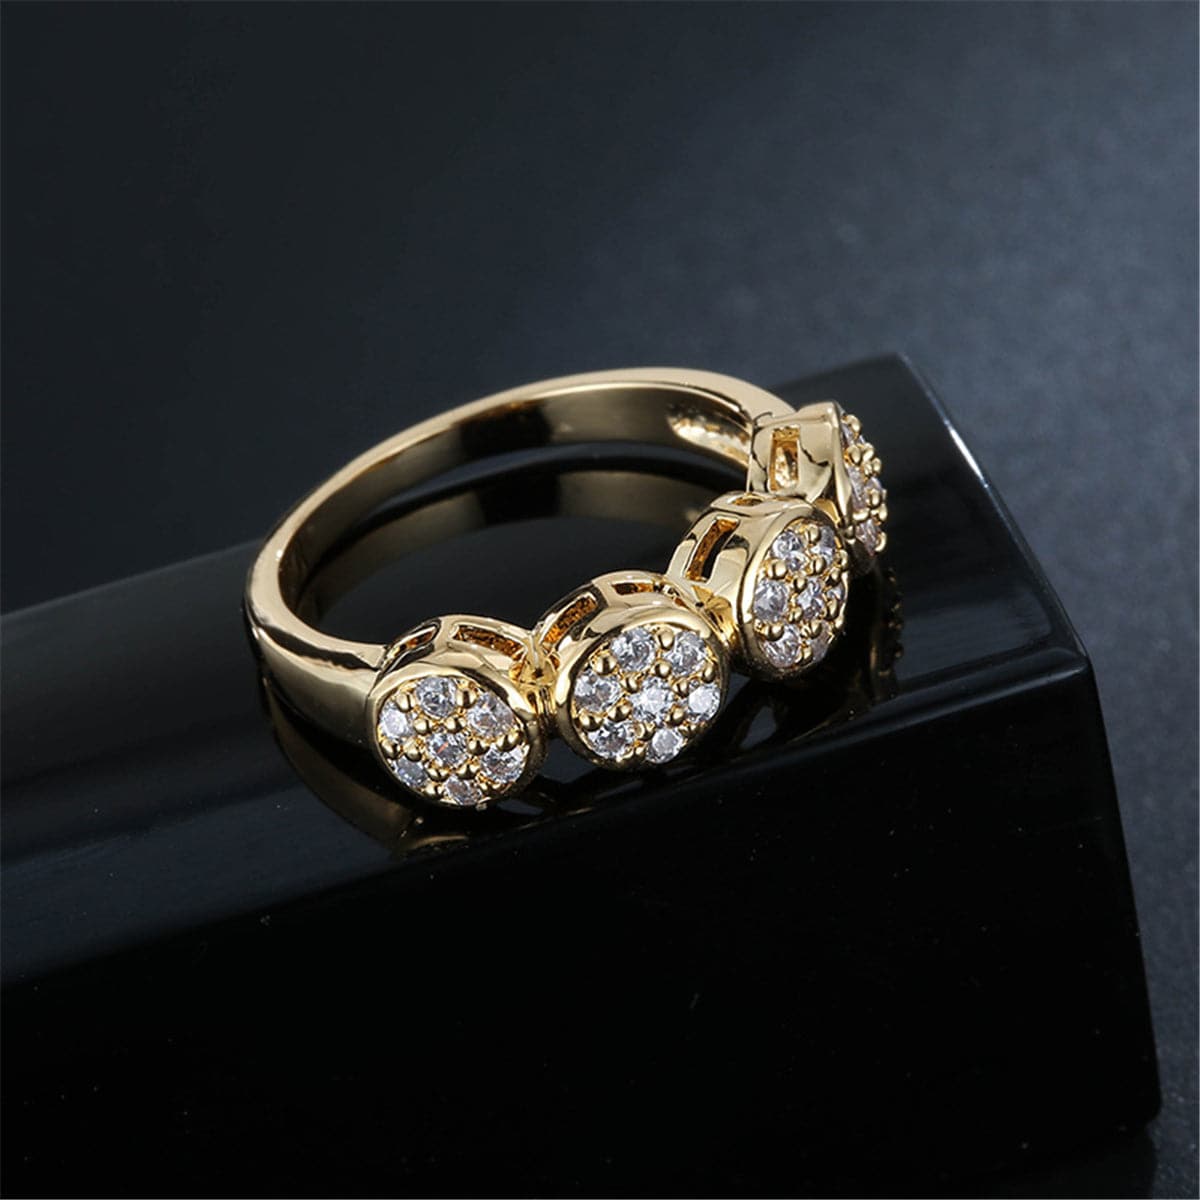 Cubic Zirconia & 18K Gold-Plated Round Row Ring